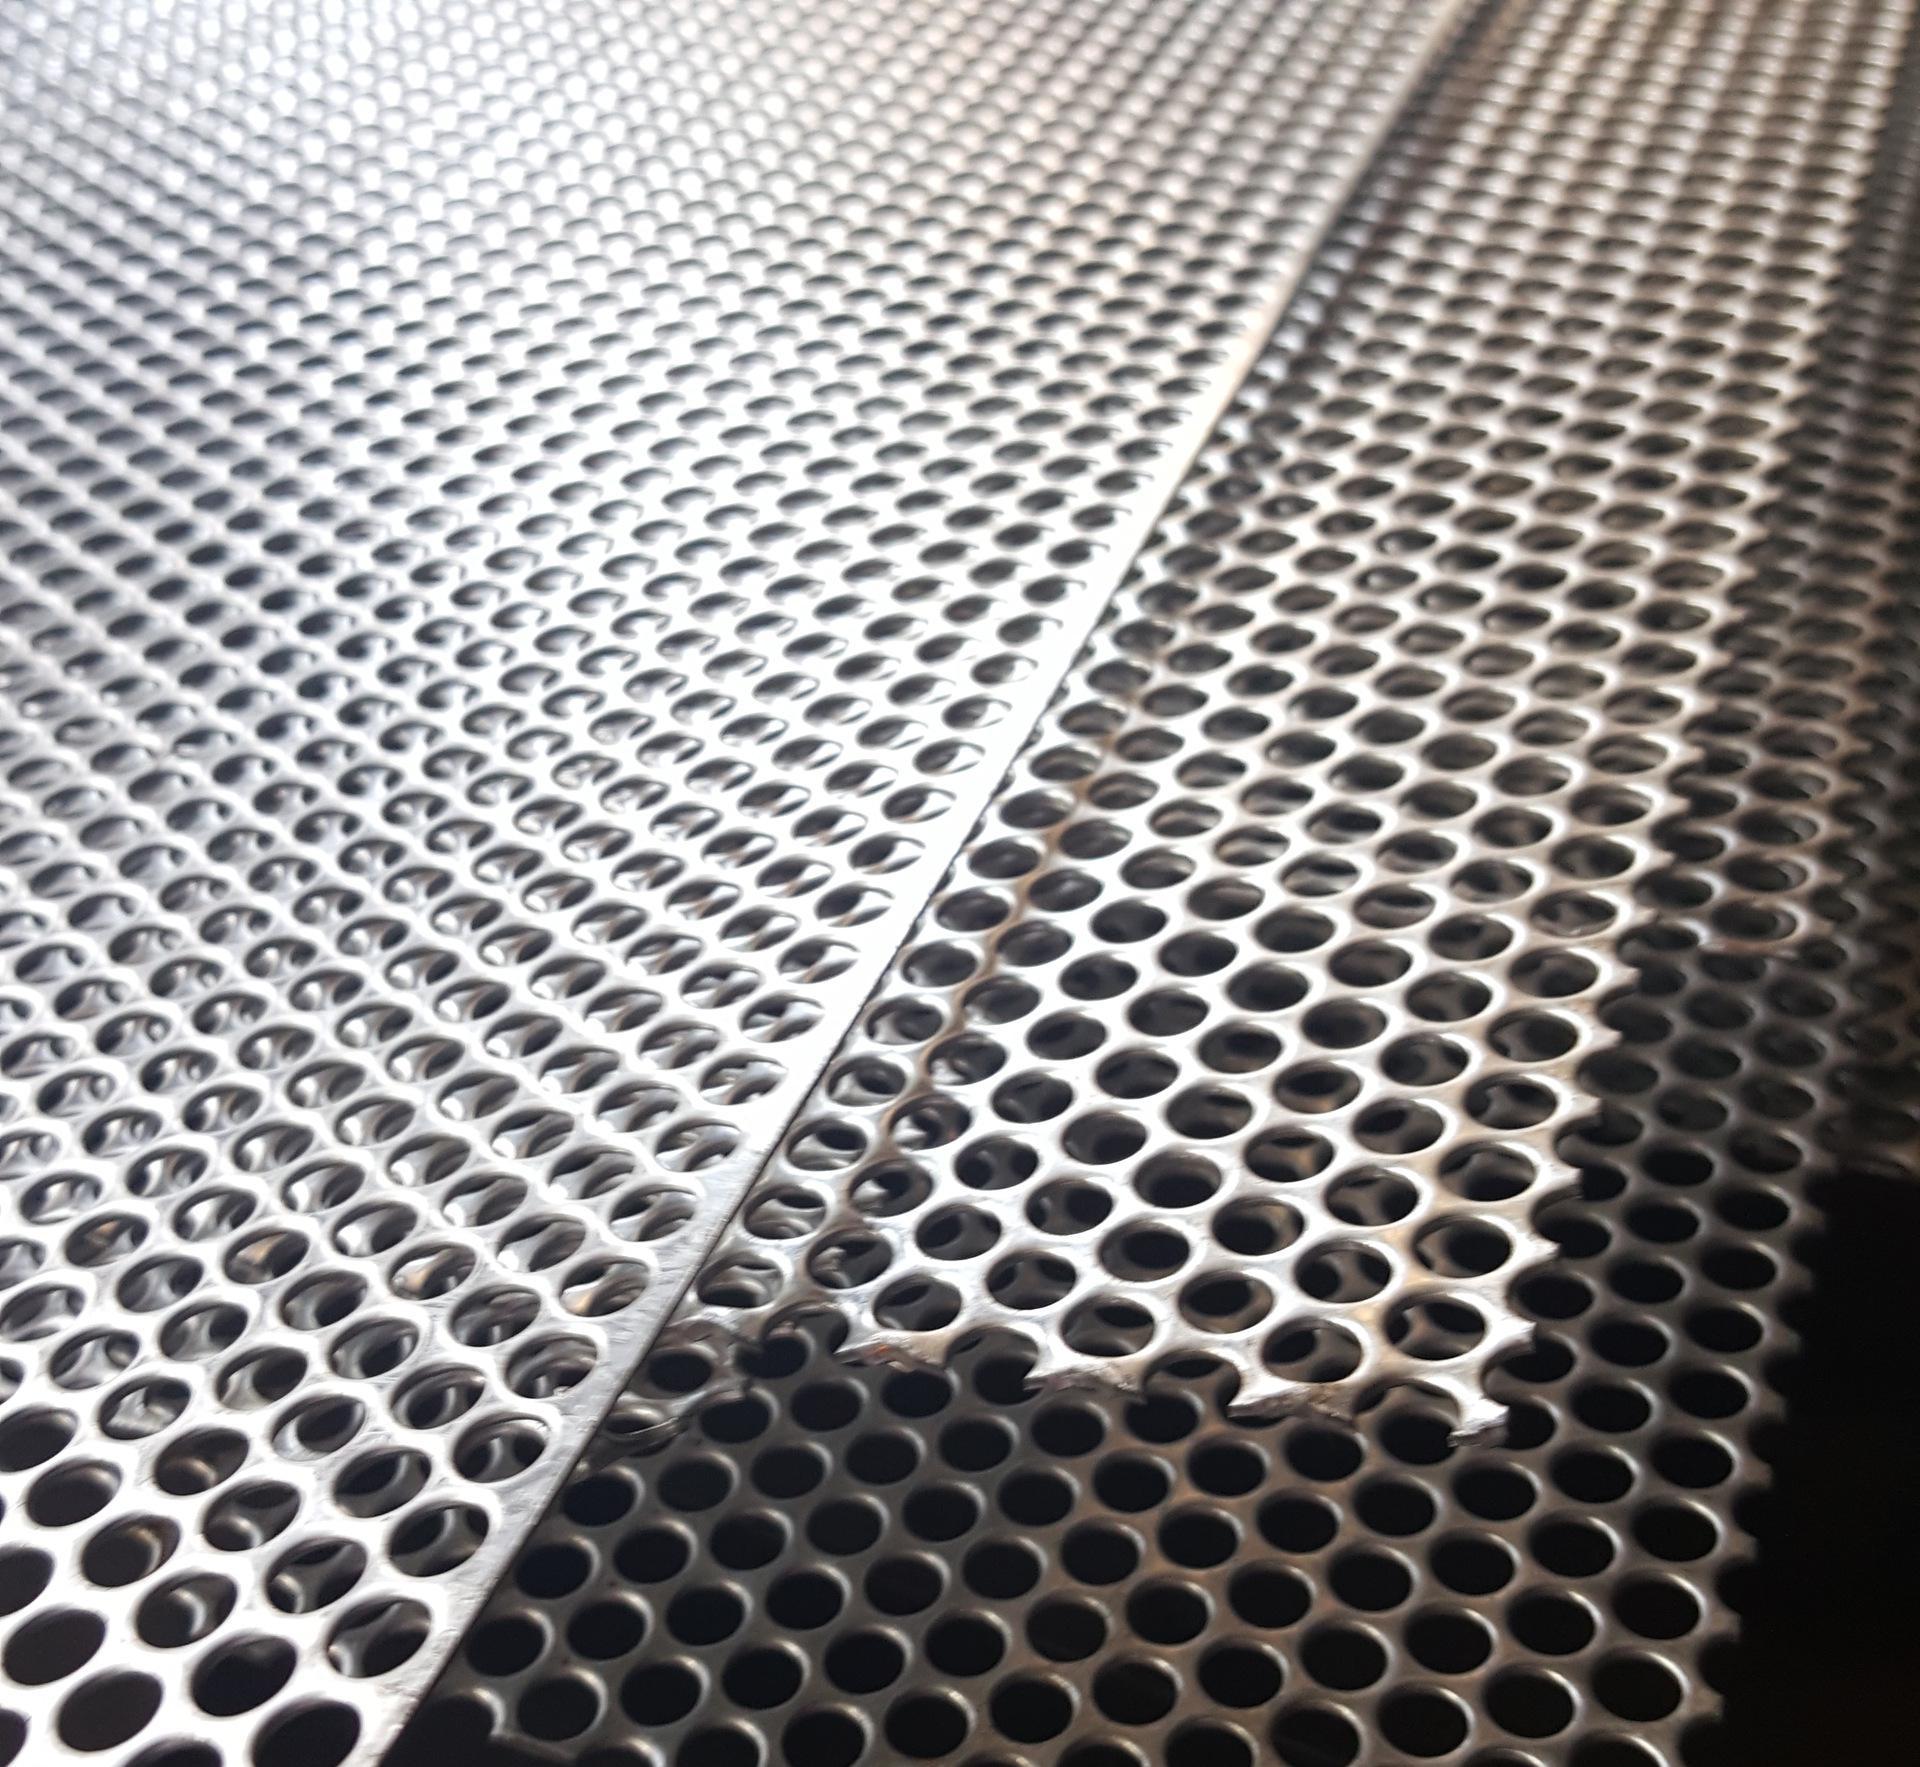 Wholesale Perforated Plate，Wholesale Perforated Steel，China Plate Perforated，China Perforated Steel，China Perforated Panels，Perforated Metal In China